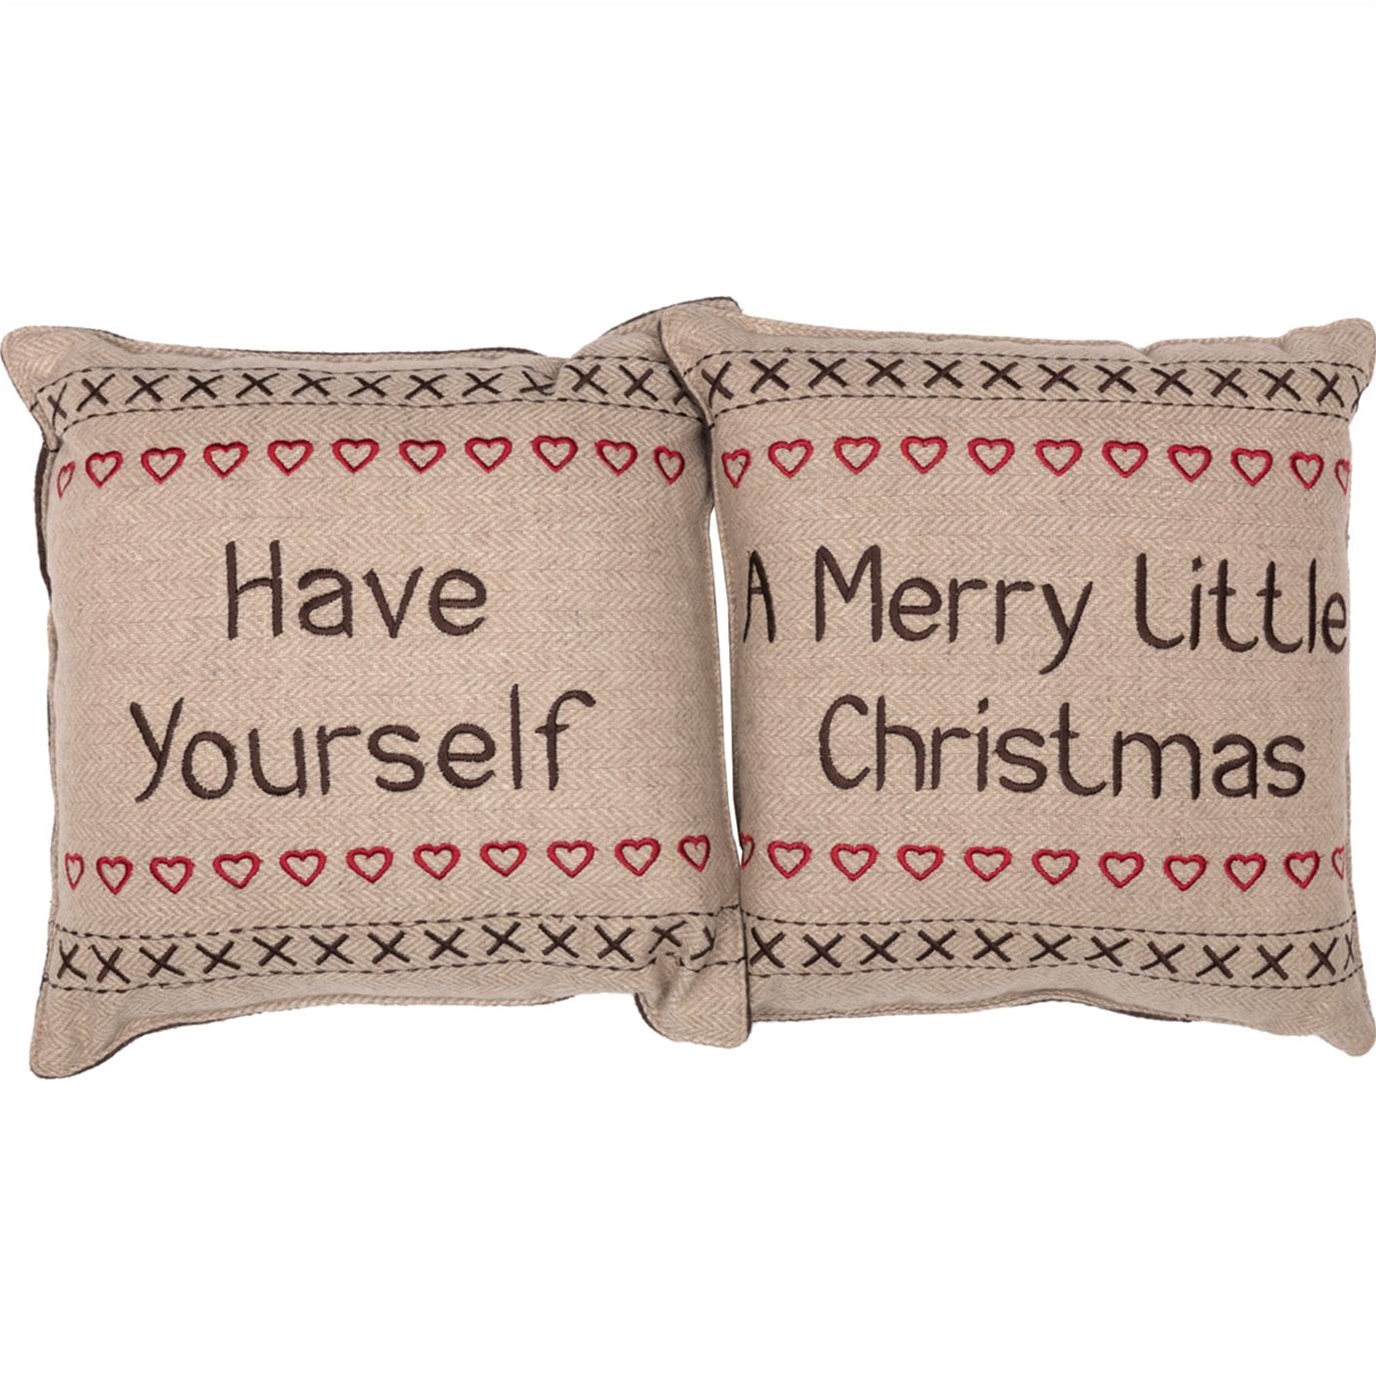 Merry Little Christmas Pillow Have Yourself A Set of 2 12x12